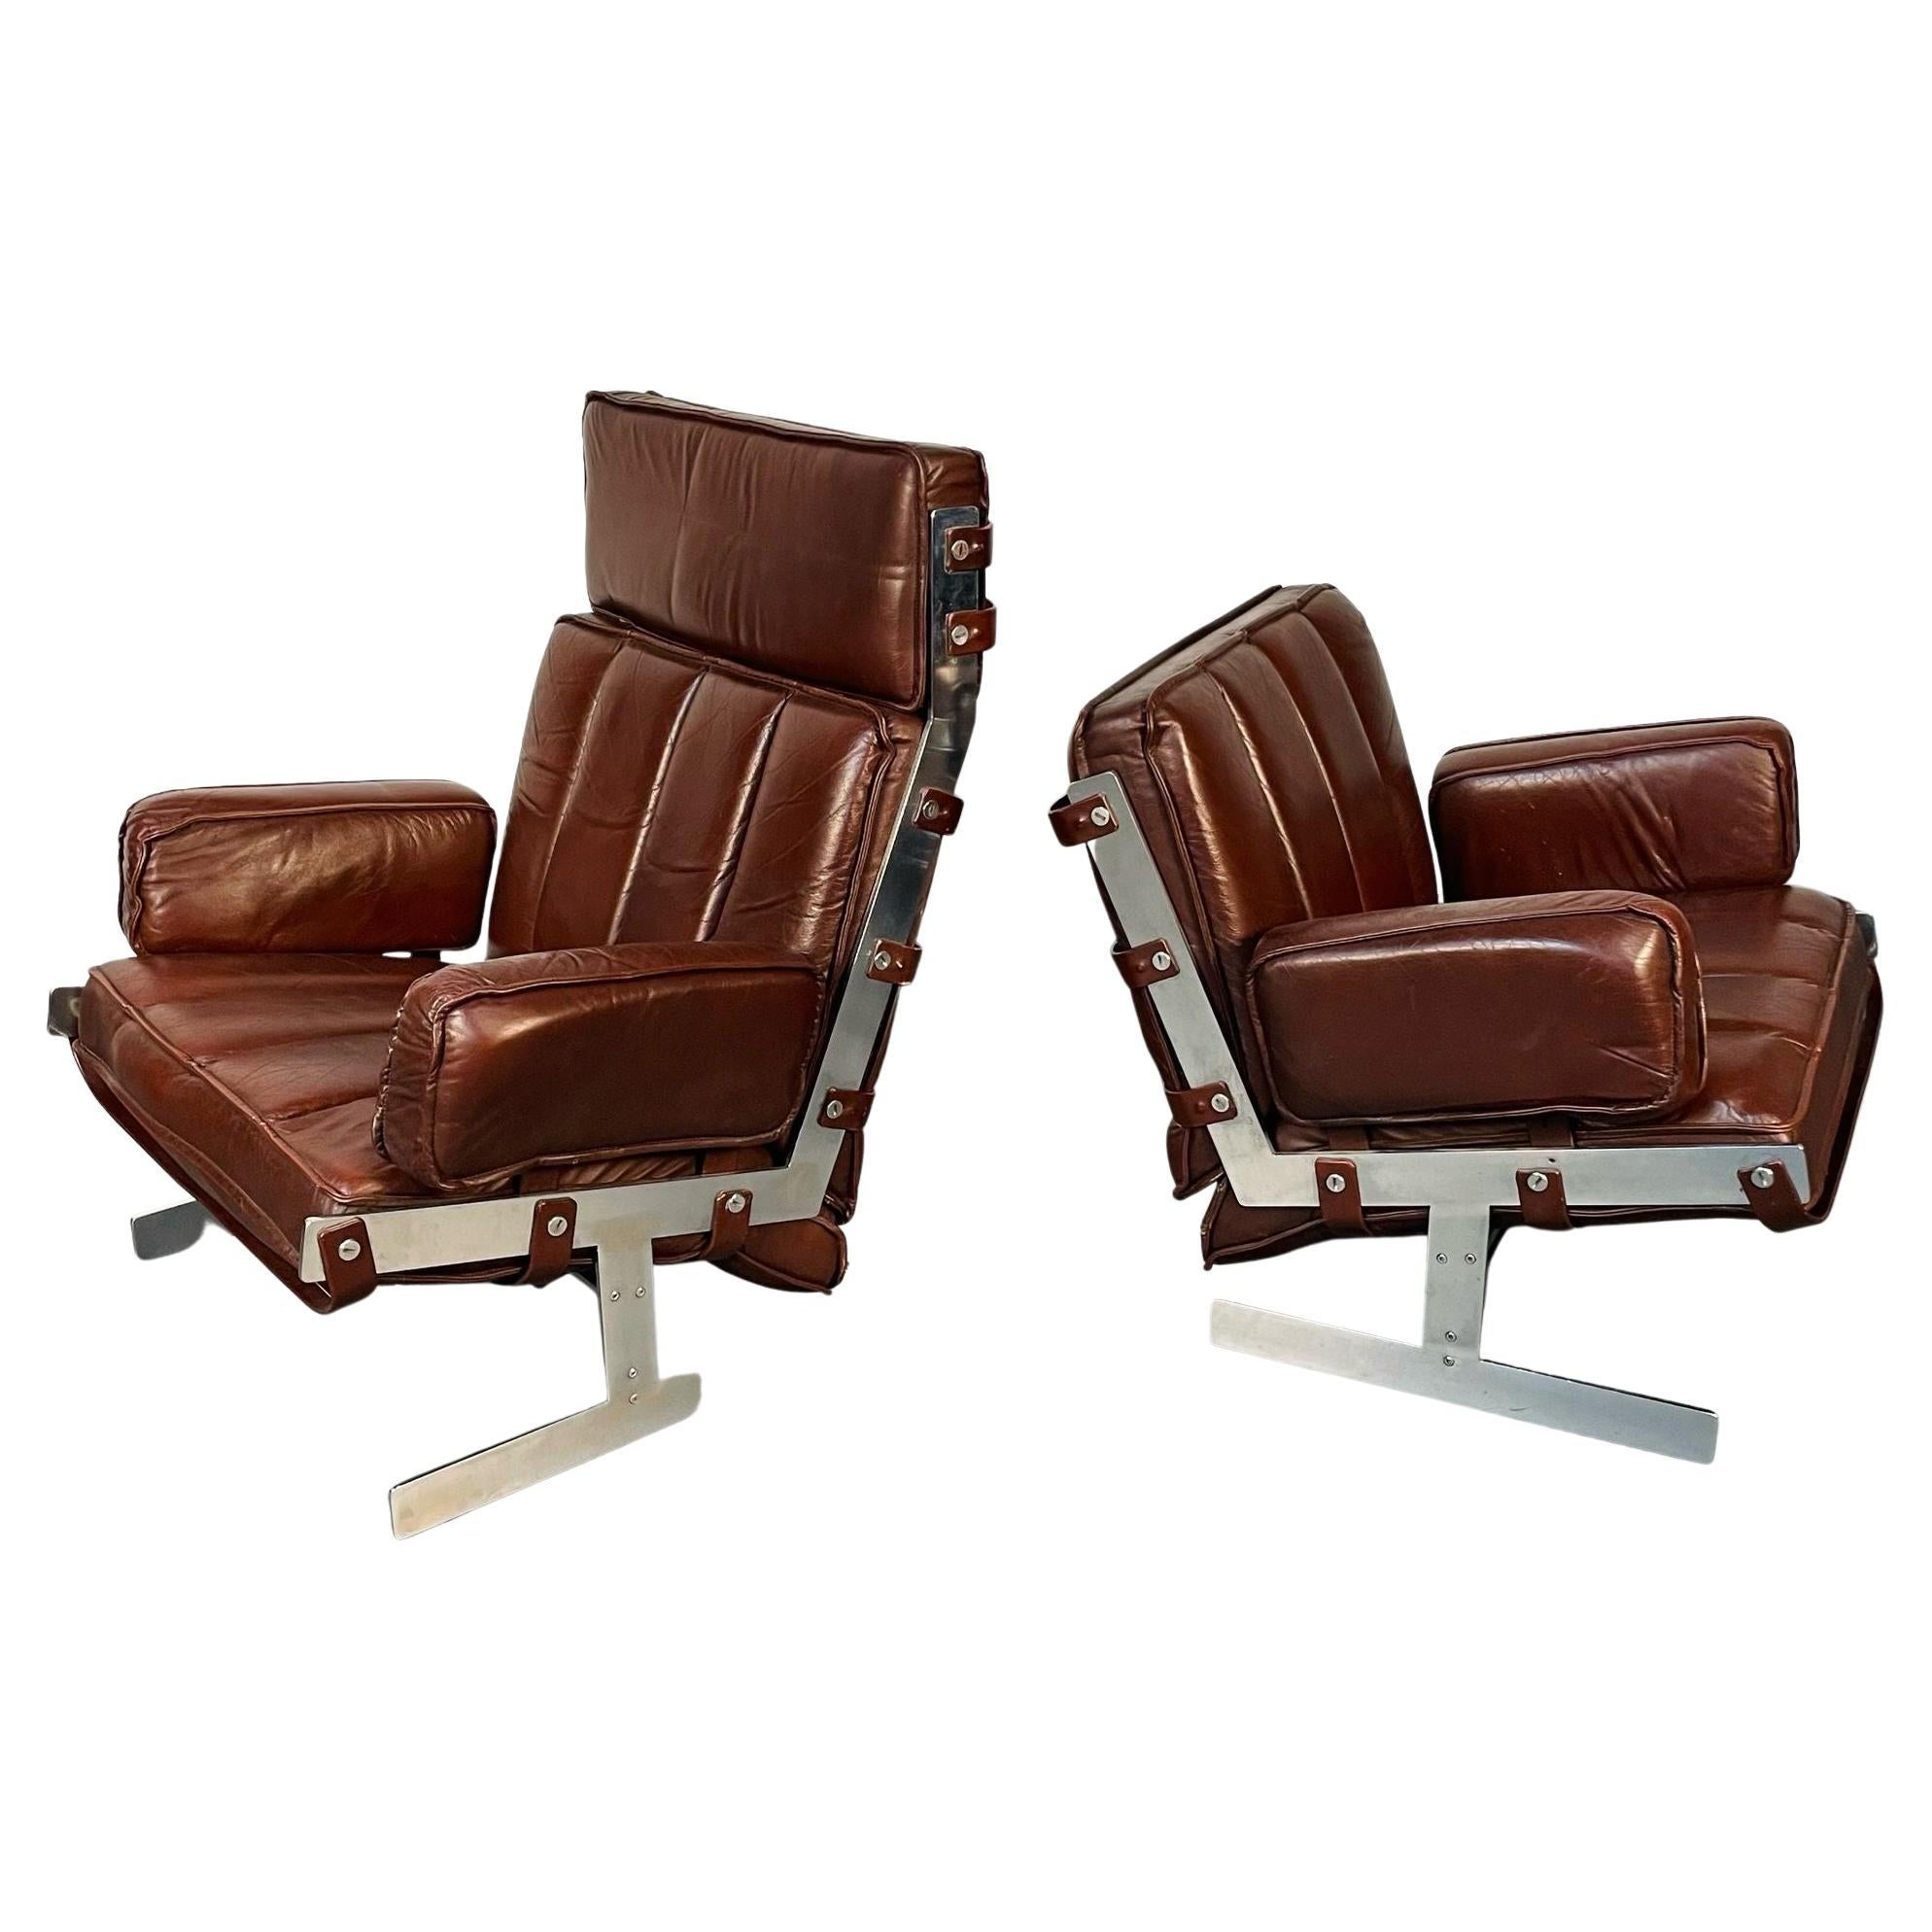 Arne Norell, Swedish Mid-Century Modern Lounge Chairs, Leather, Steel, 1960s For Sale